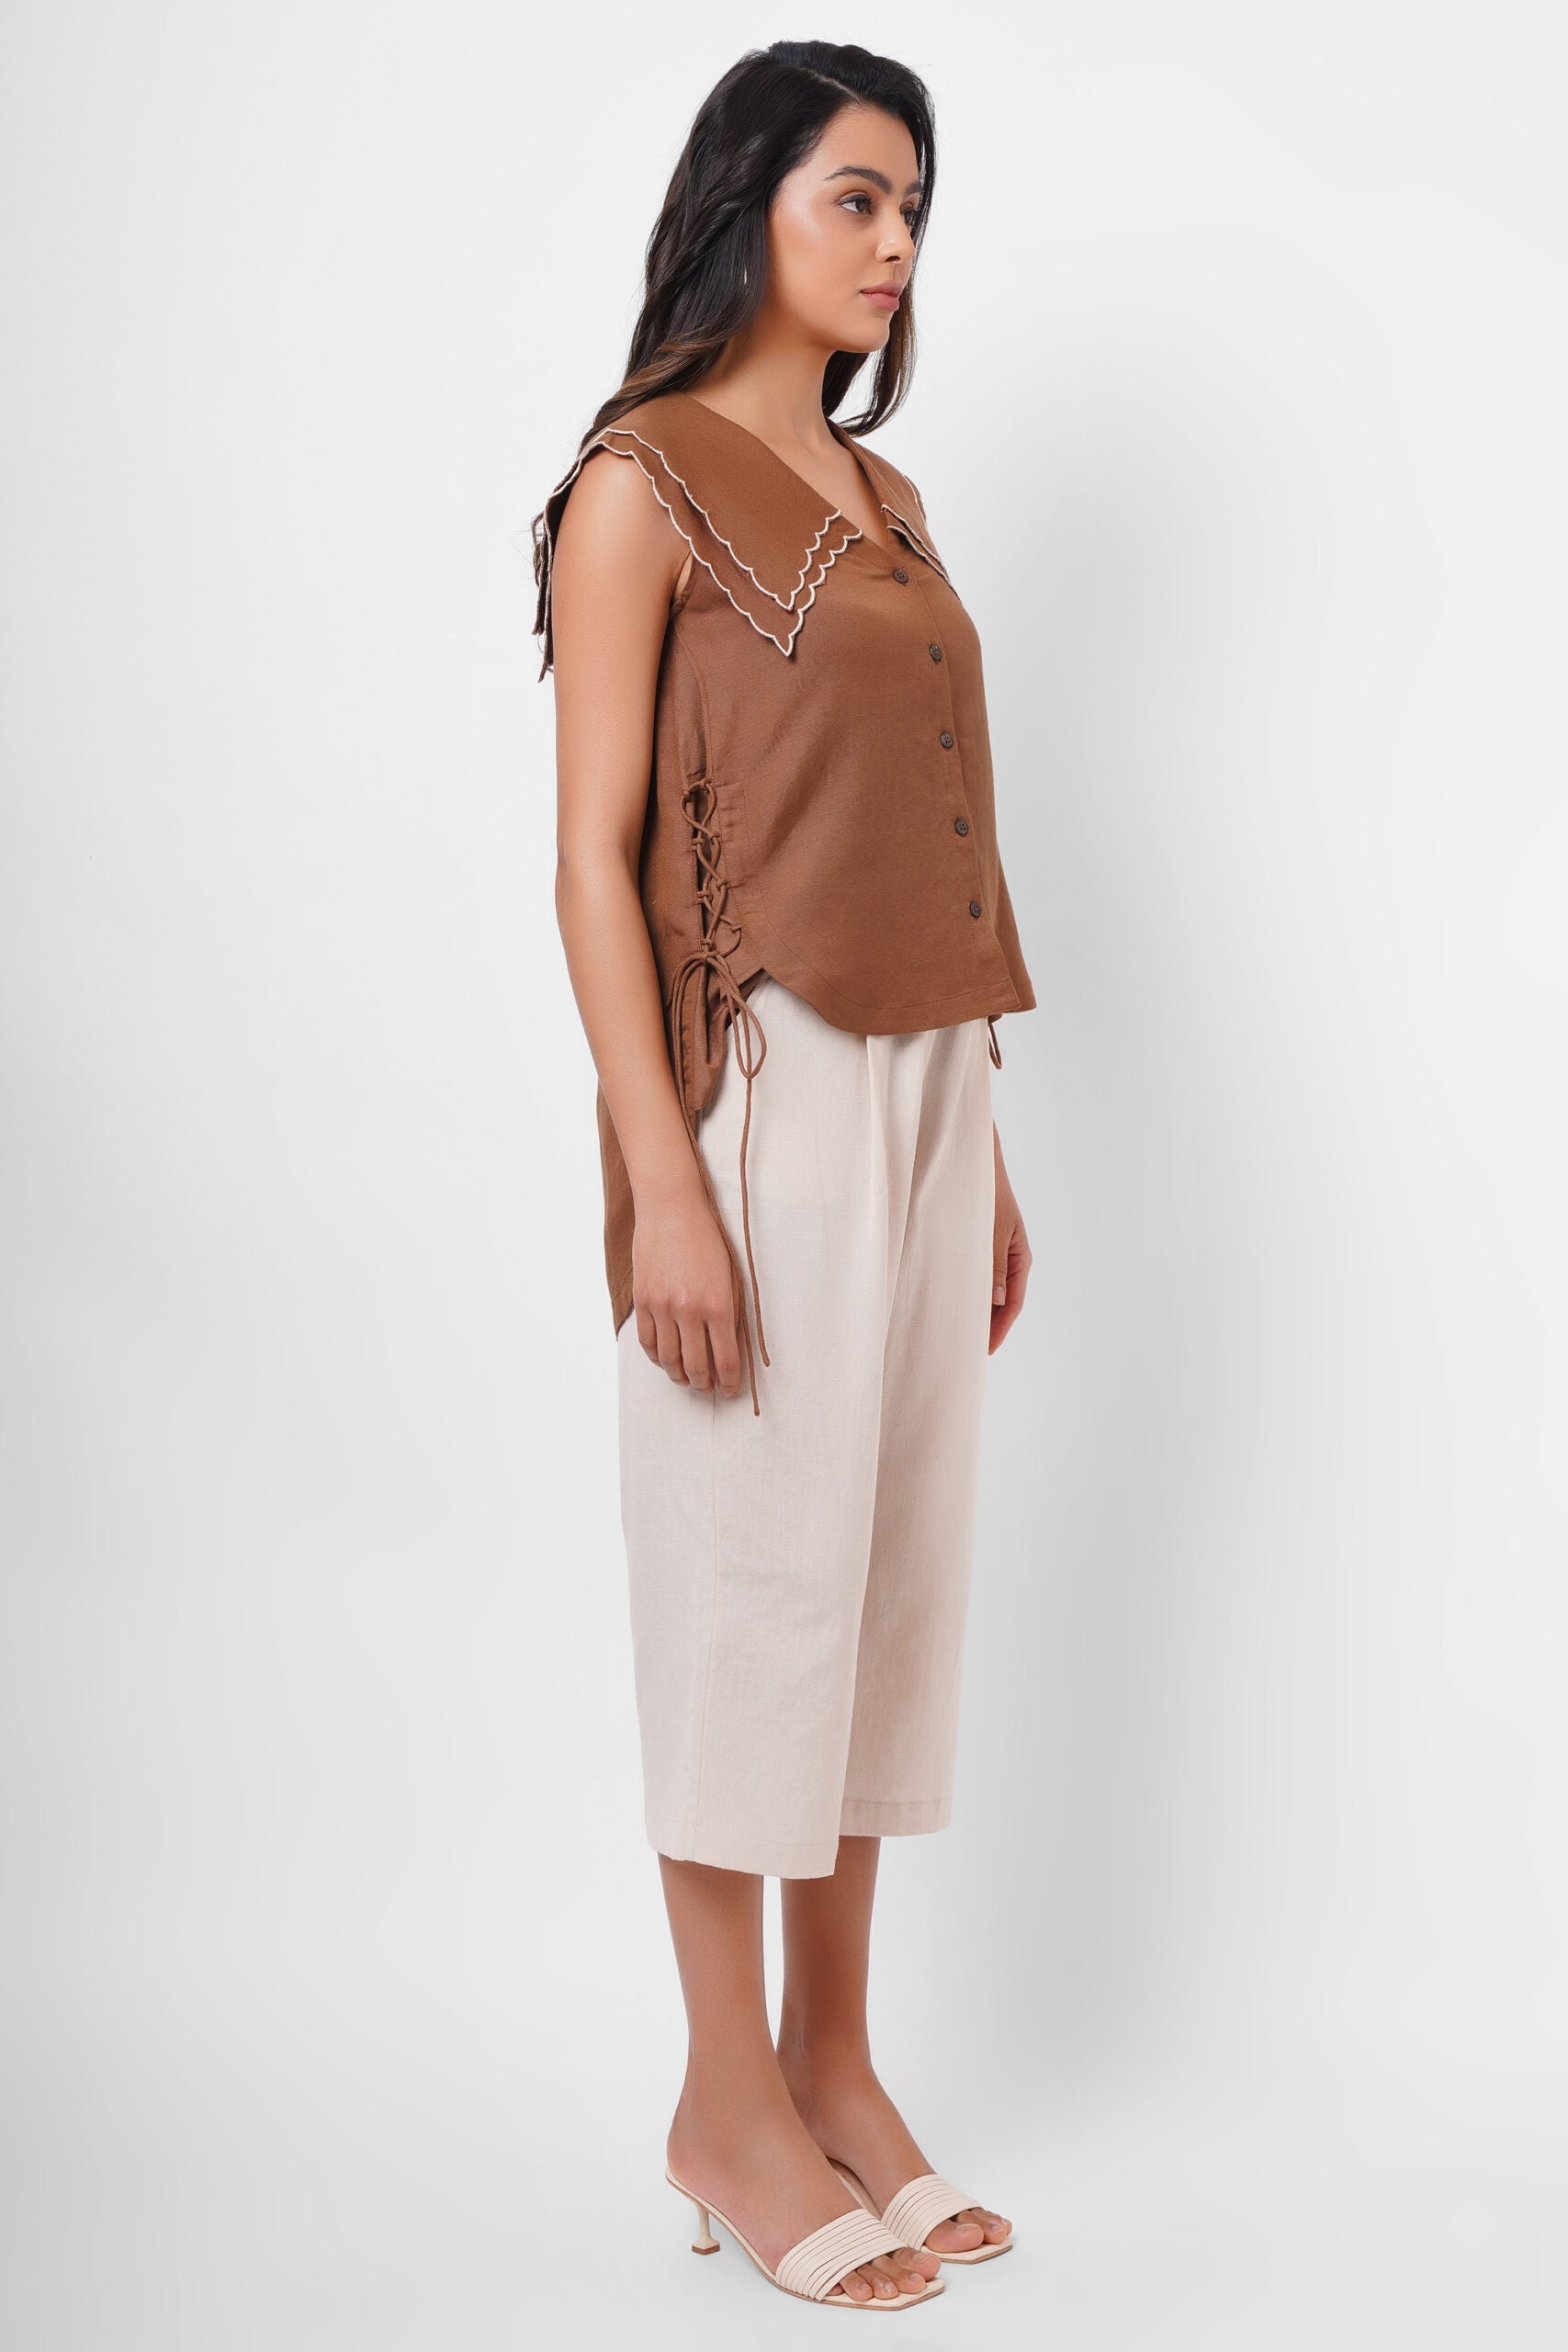 Scalloped Edge Collars Brown Linen Top with Drawstrings - Western Era  Tops